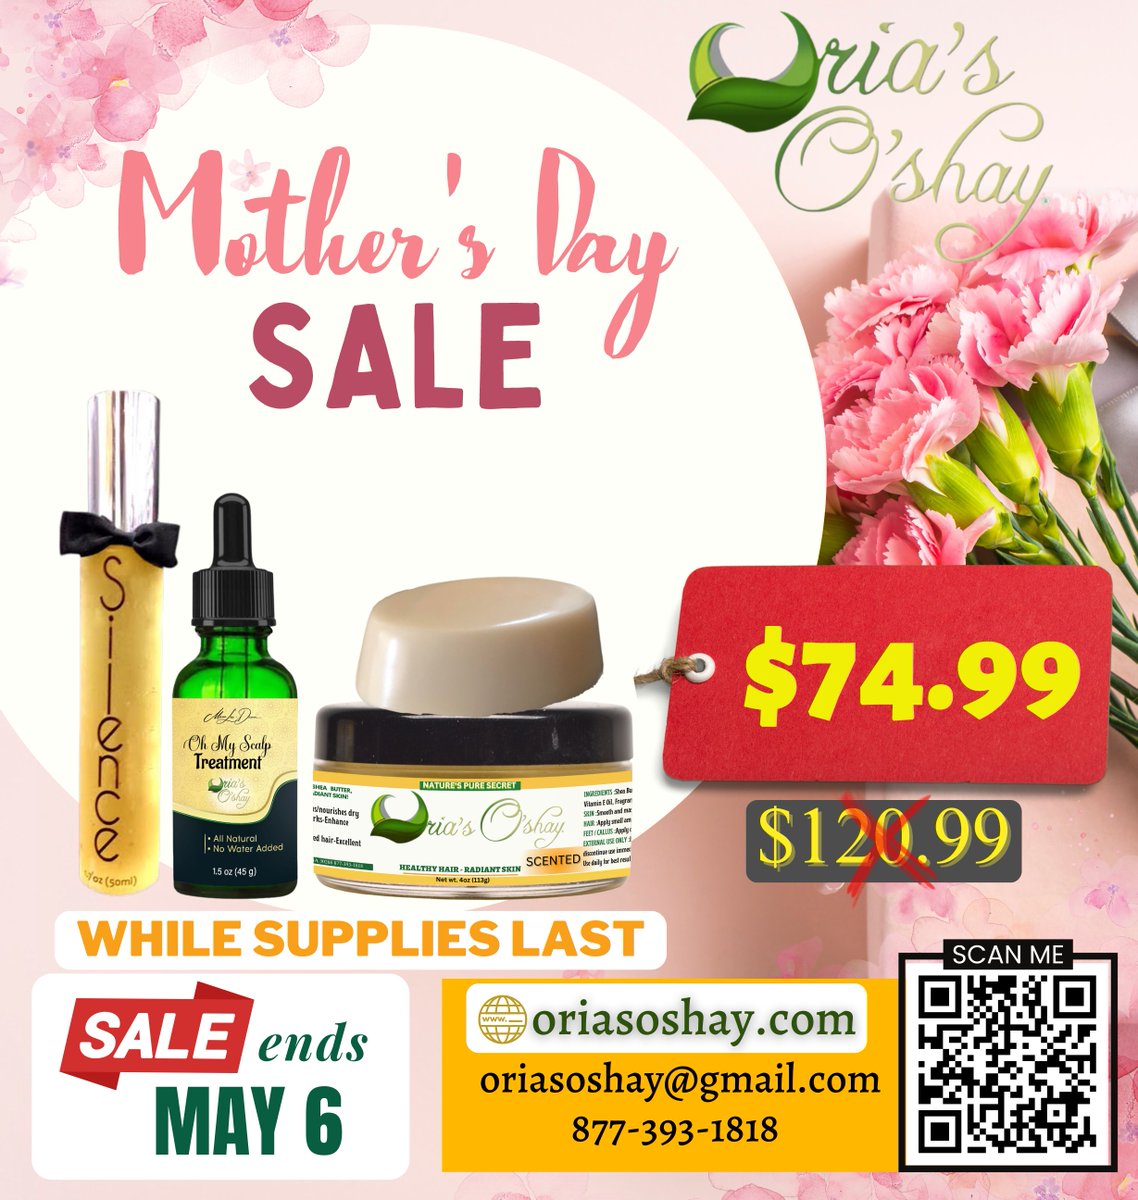 Oria's O'shay
(Mothers Day Special Bundle)

-All Natural Body Butter
-Moisturizing Goat Milk Soap
-Oh My Scalp Treatment
-Silence 1.7 oz

-$74.99 only

Buy Now!!!
While Supplies Last!
(Sale ends May 6)

oriasoshay.com
877-393-1818

#salesalesale #mothersday #motherslove